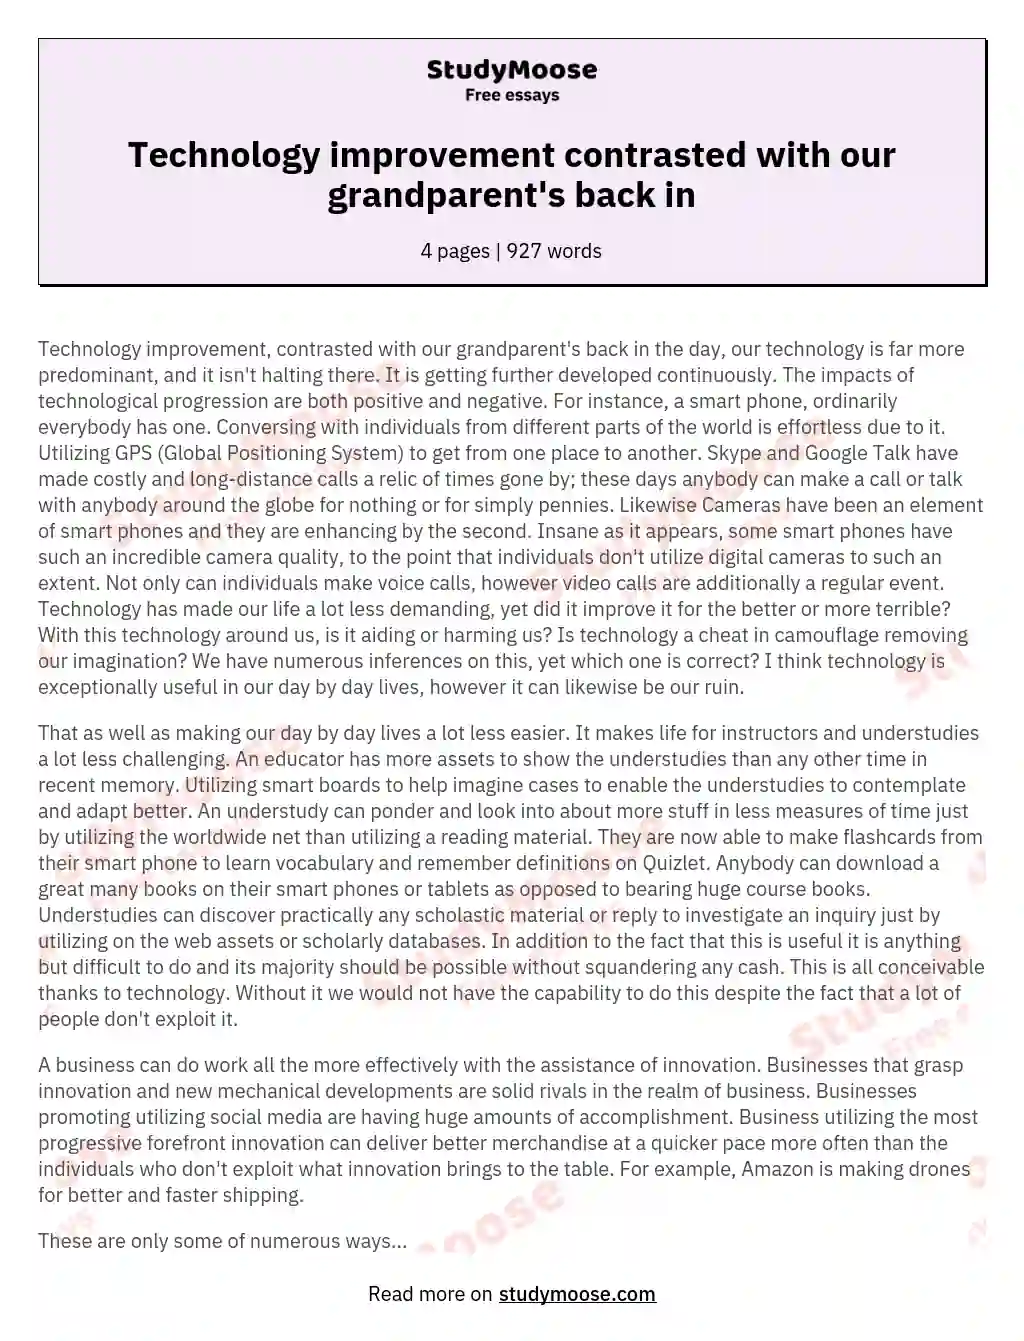 Technology improvement contrasted with our grandparent's back in essay